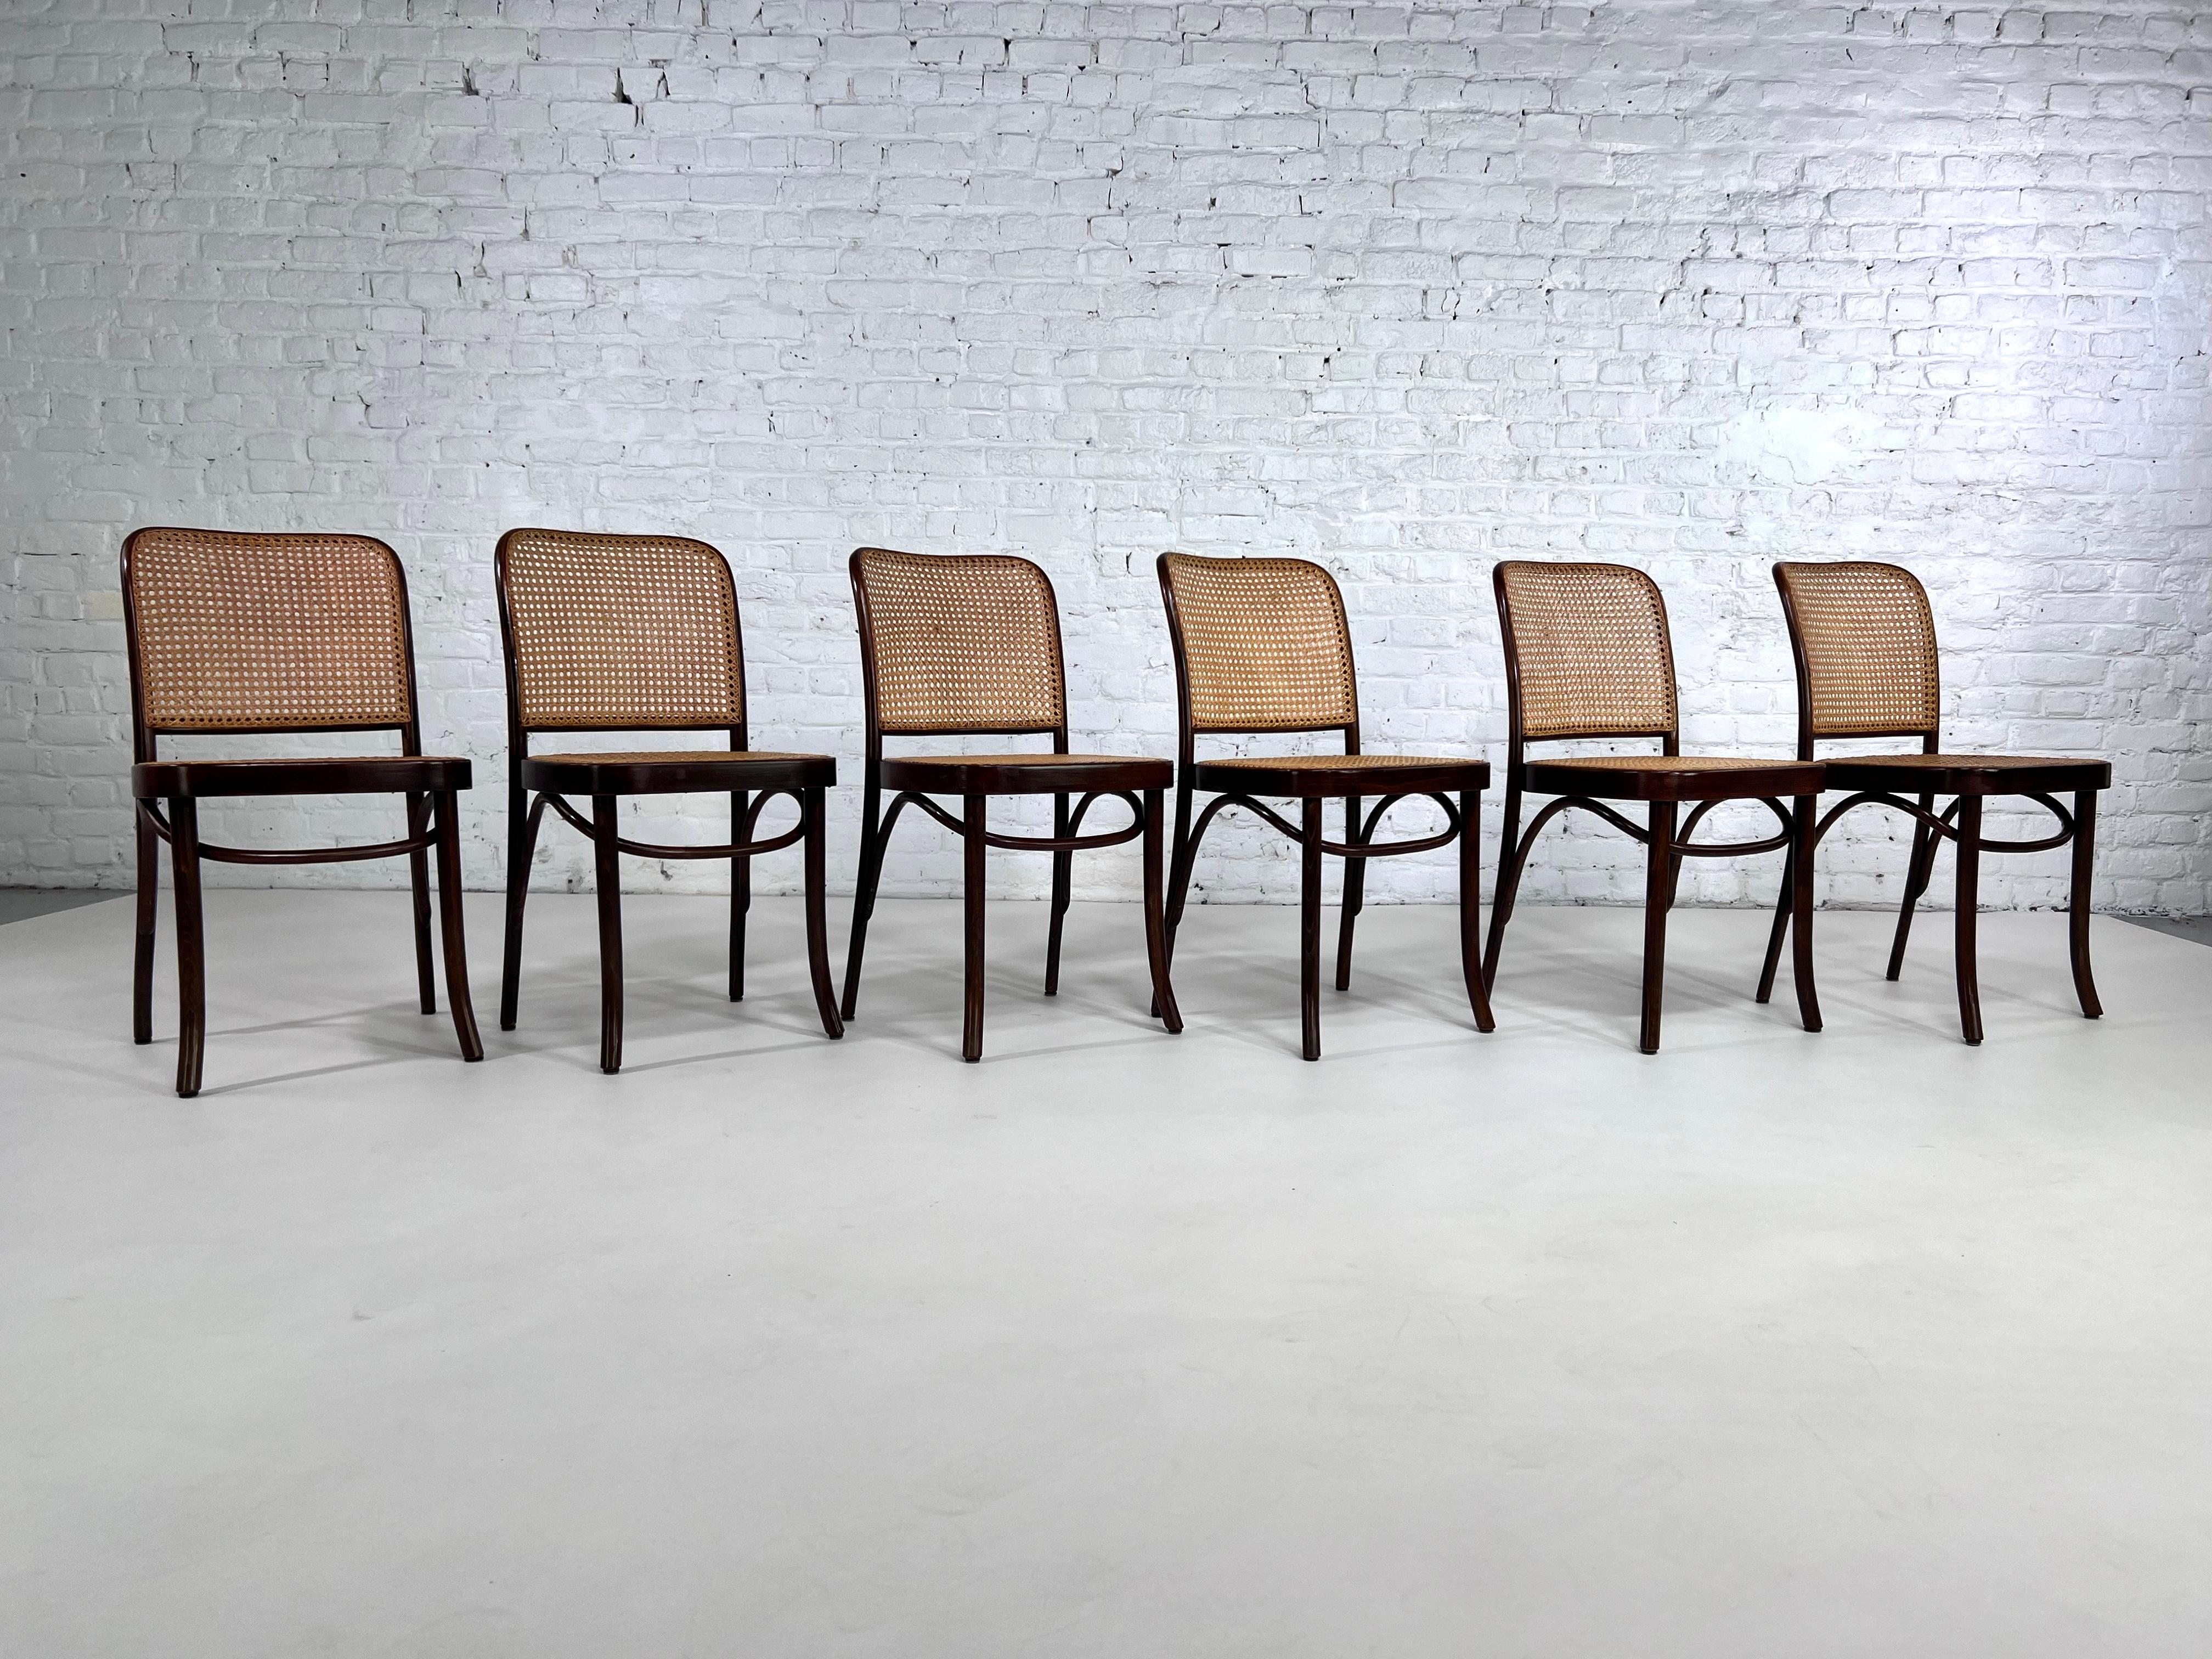 European 1920s Josef Hoffman Bentwood and Cane Set of 6 Chairs Prague Model for Thonet